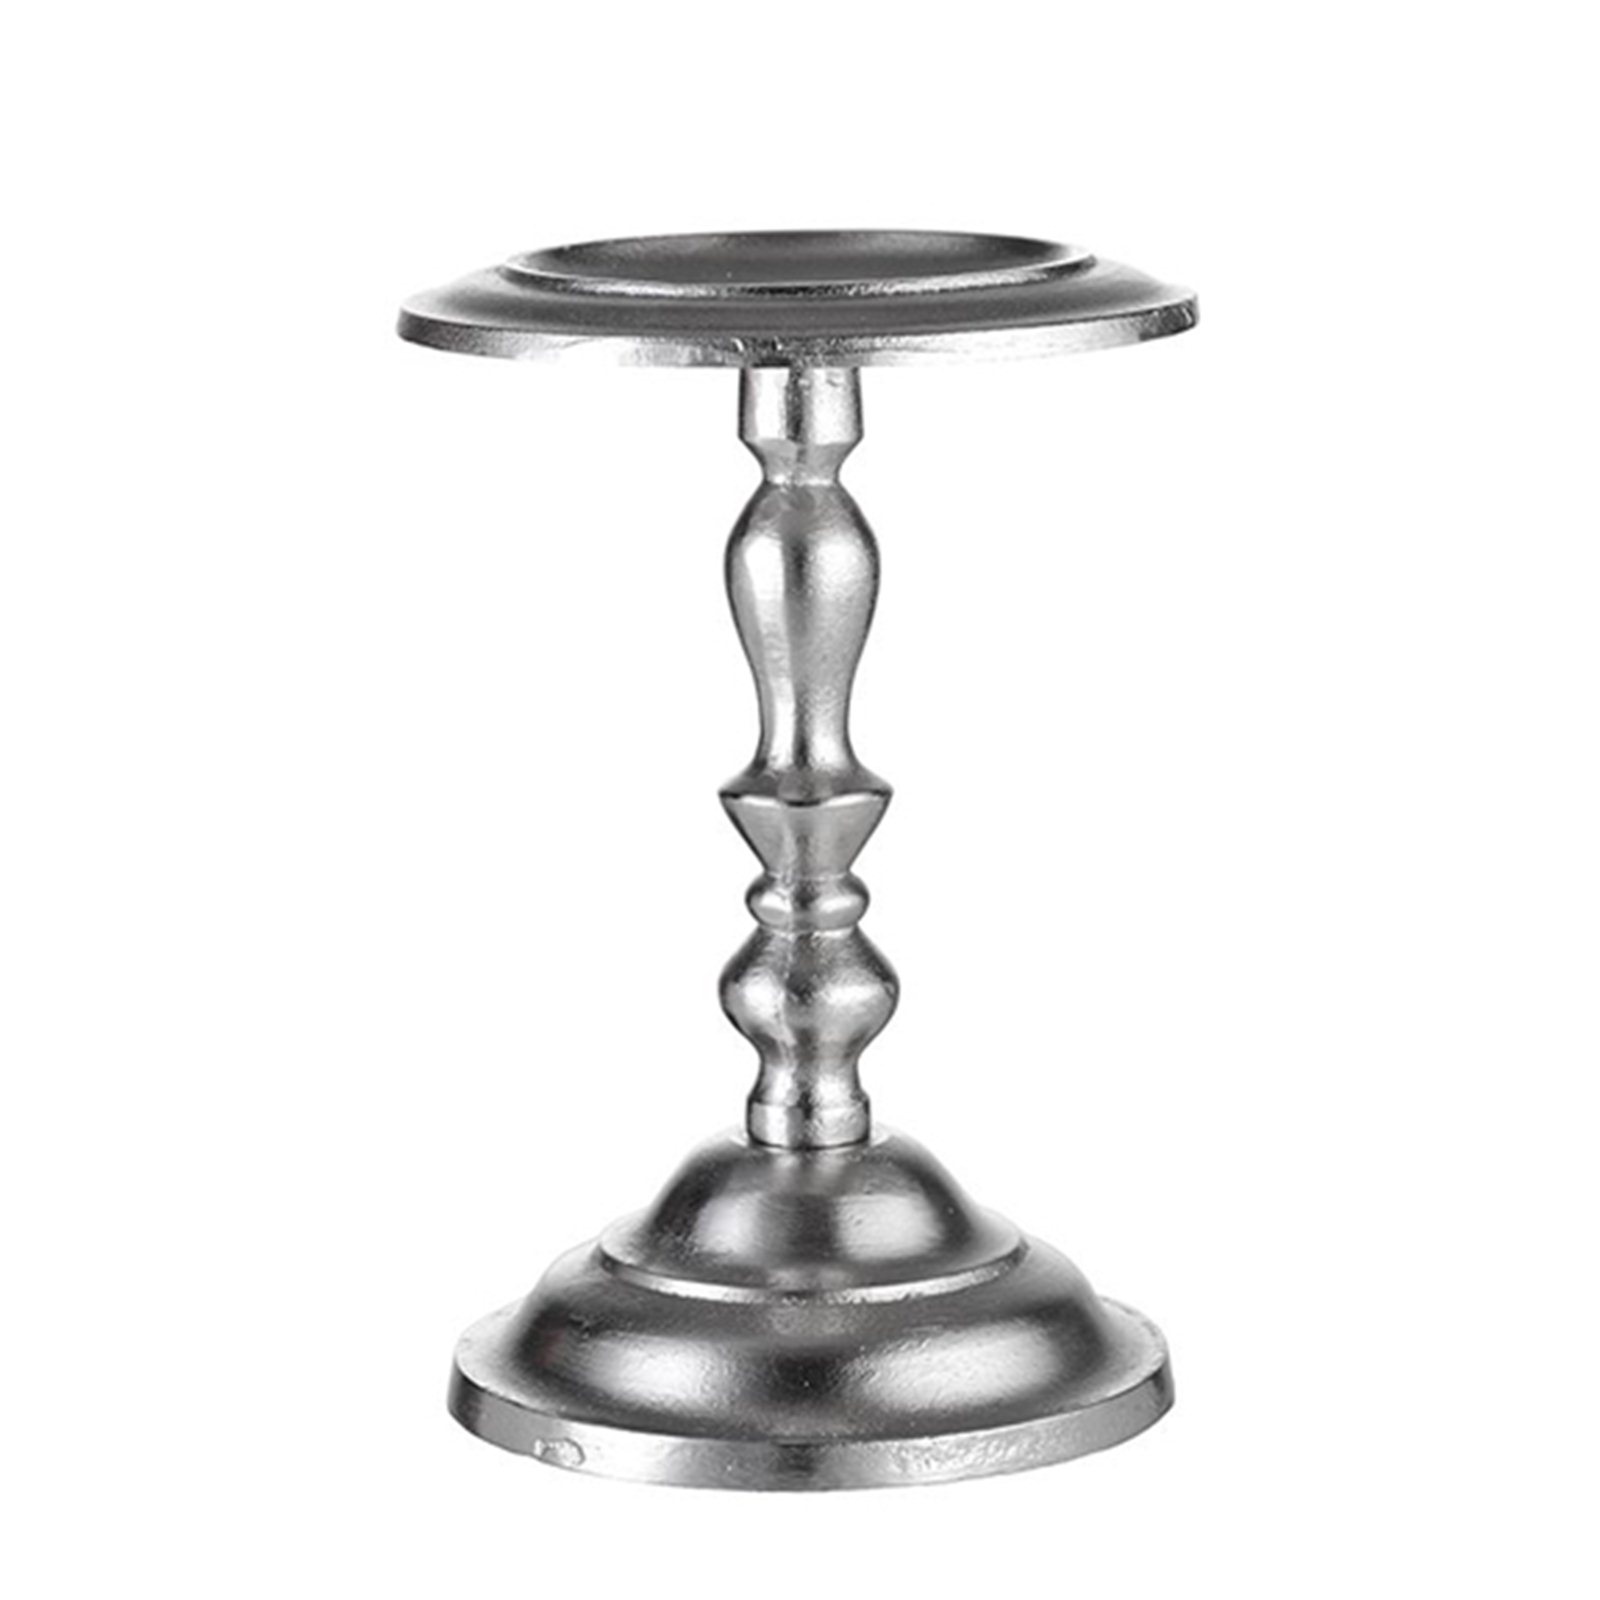 Silver Nickel Candlestick Image